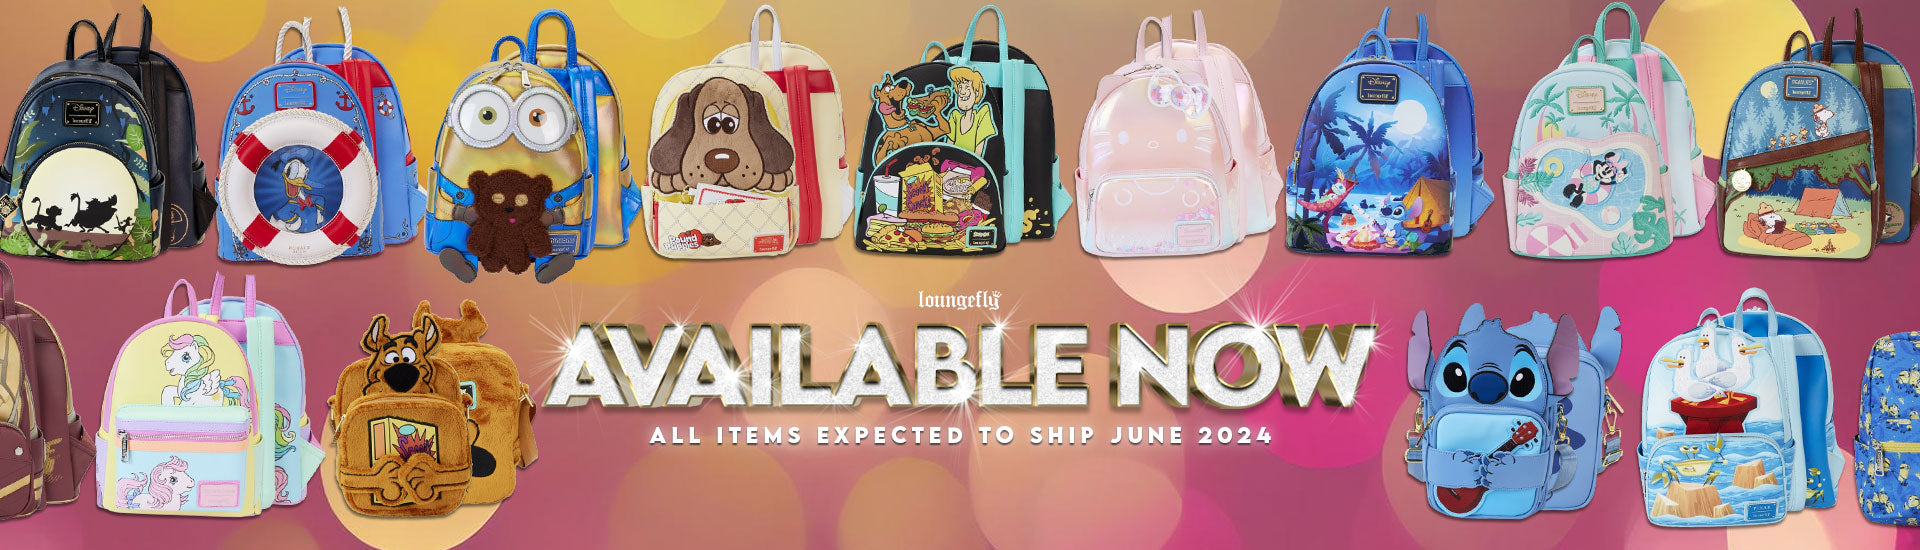 Loungefly June 2024 Catalog Featuring Pop-Culture Focused Accessories with Licenses Such as Scooby-Doo, Hello Kitty, Pound Puppies, Despicable Me, Lilo & Stitch and More! Available May, 17 at 9PM PT. Expected to arrive June 2024.